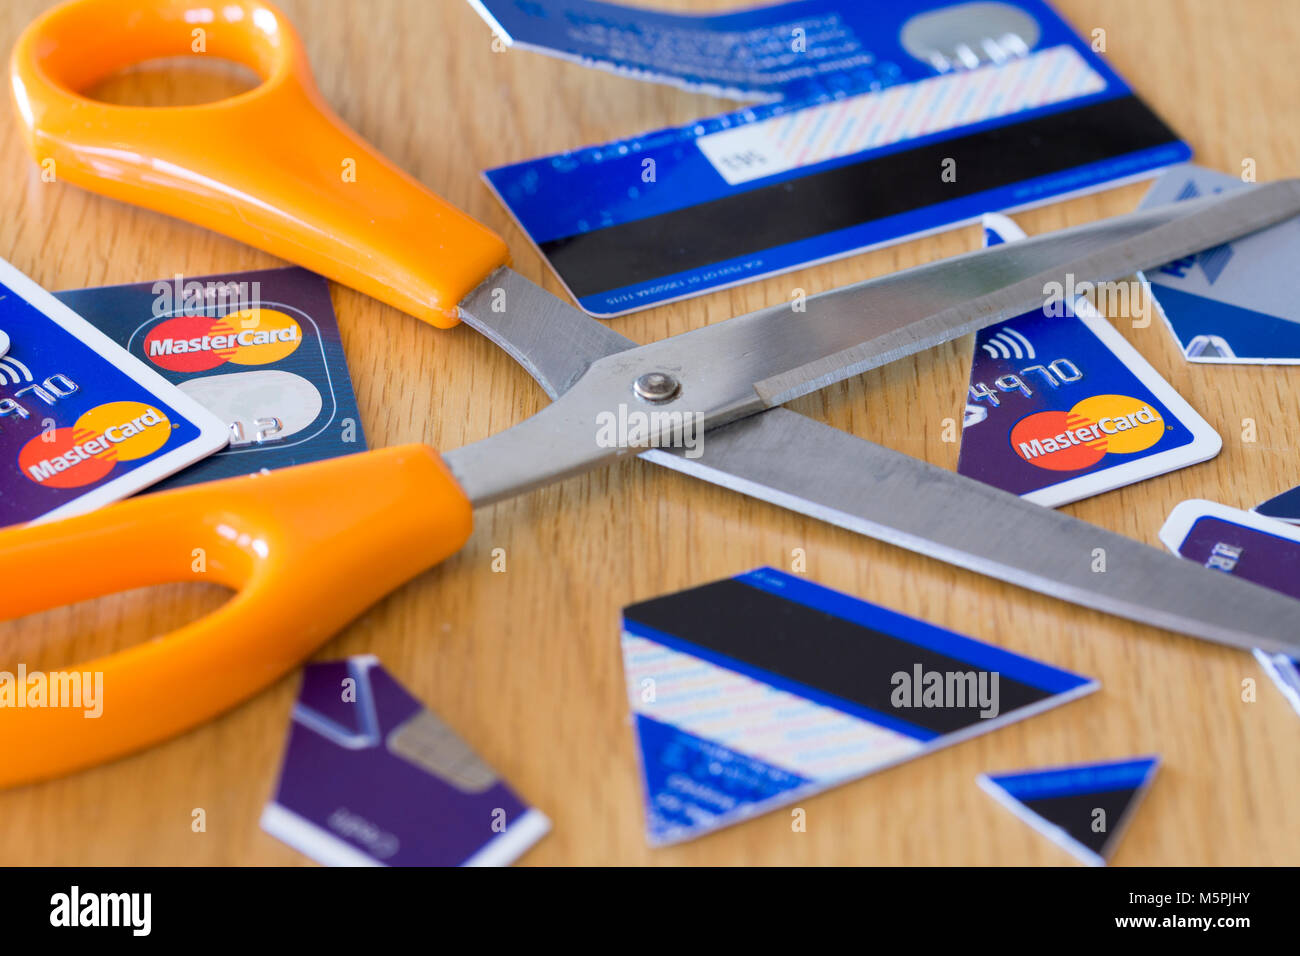 A pair of scissors in the middle of cut up credit cards - credit card debt concept Stock Photo